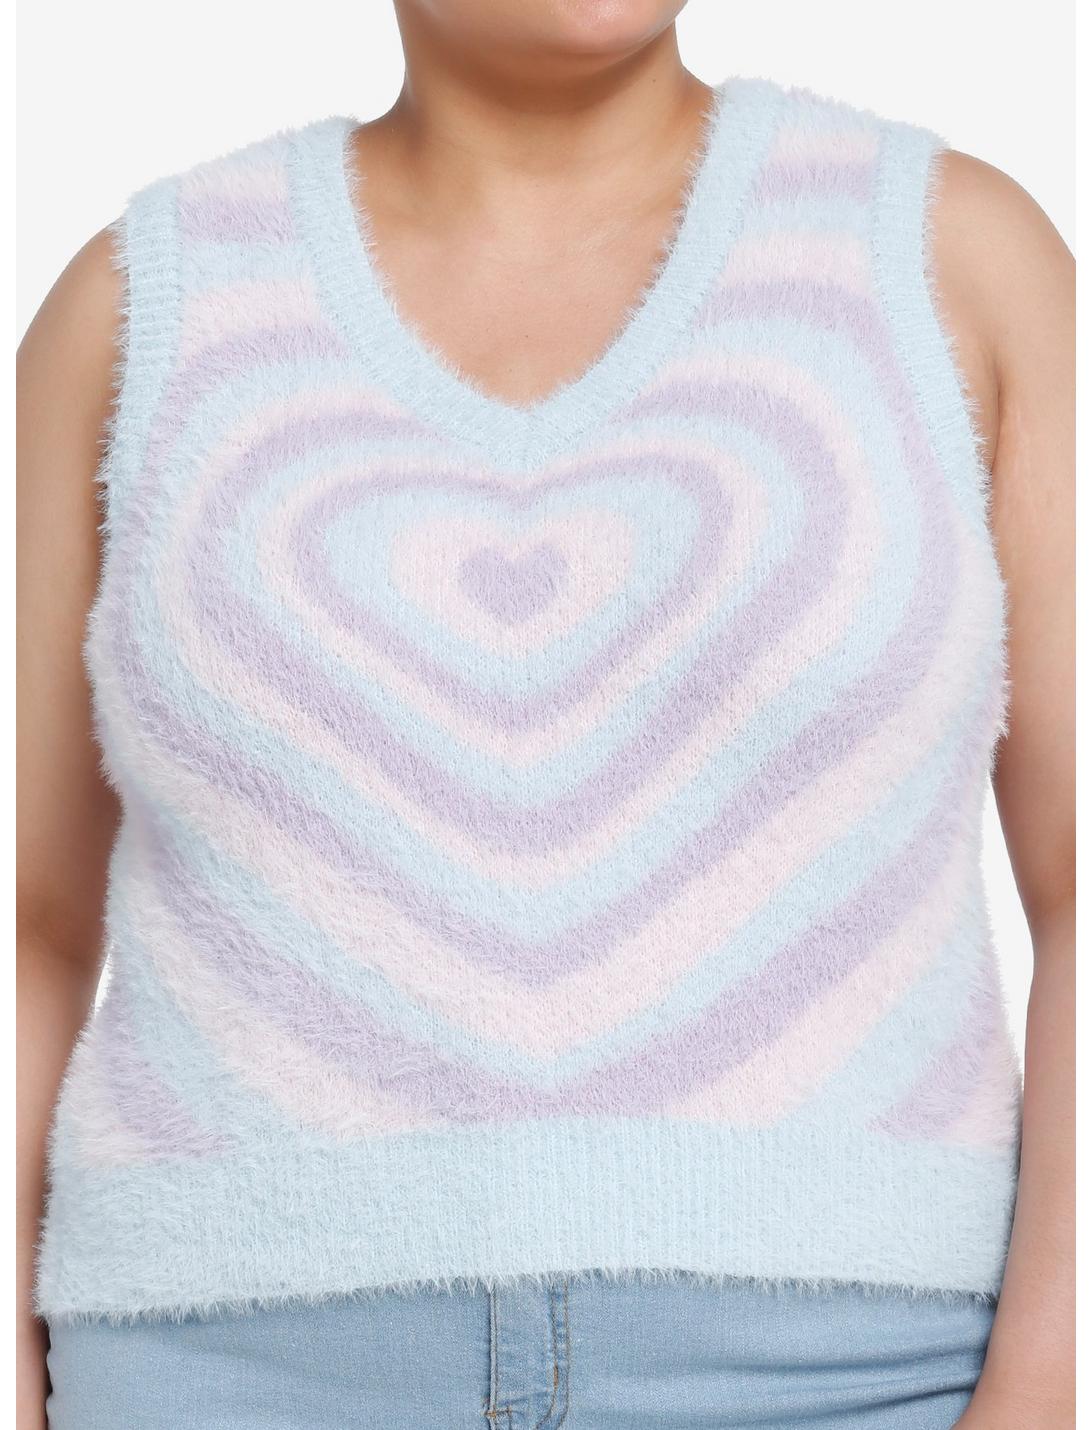 Sweet Society Pastel Hearts Fuzzy Girls Sweater Vest Plus Size, MULTI, hi-res